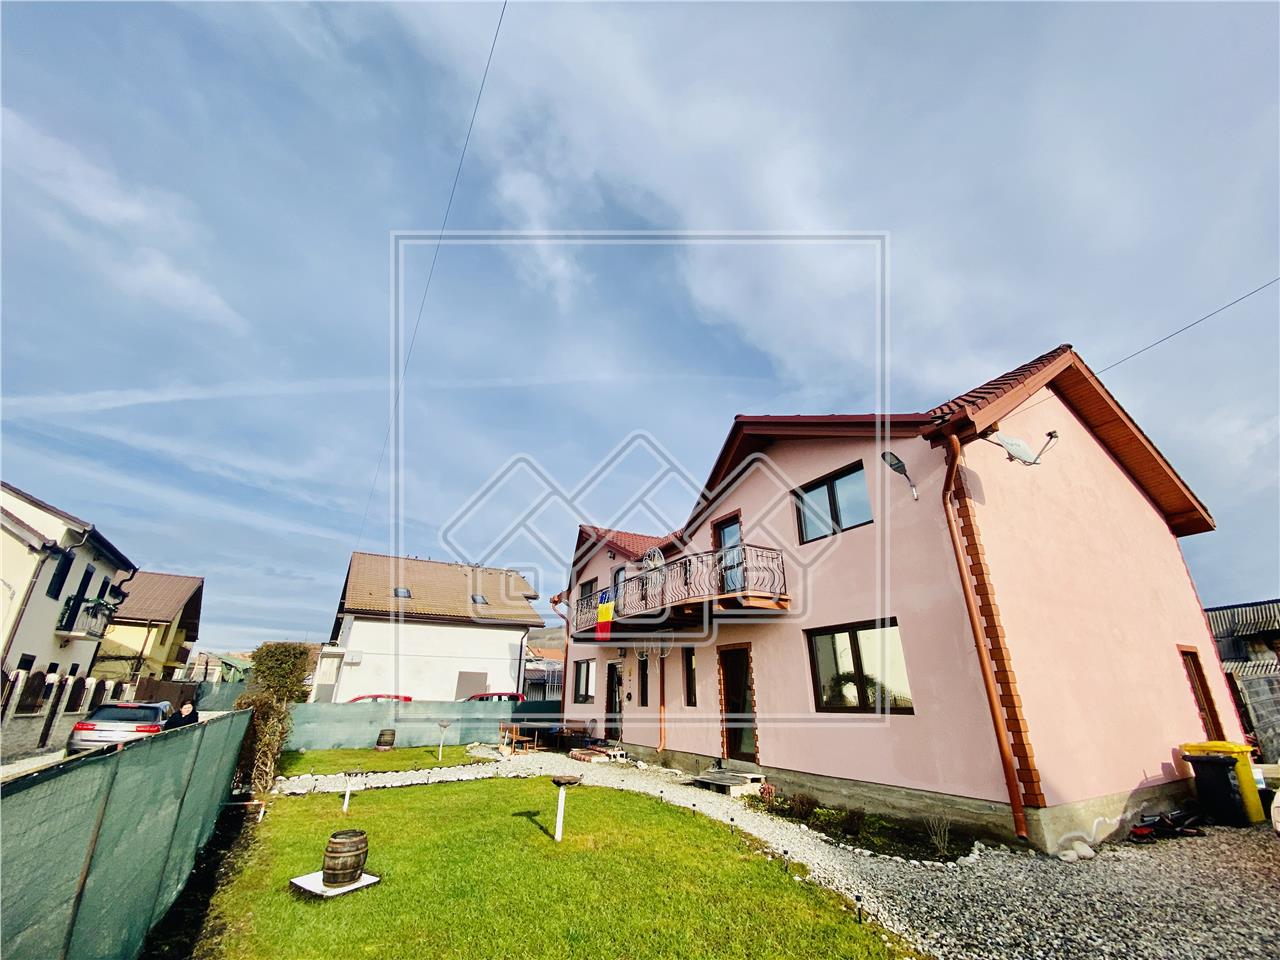 House for sale in Sibiu - 2 buildings - land 473 sqm - Sura Mare